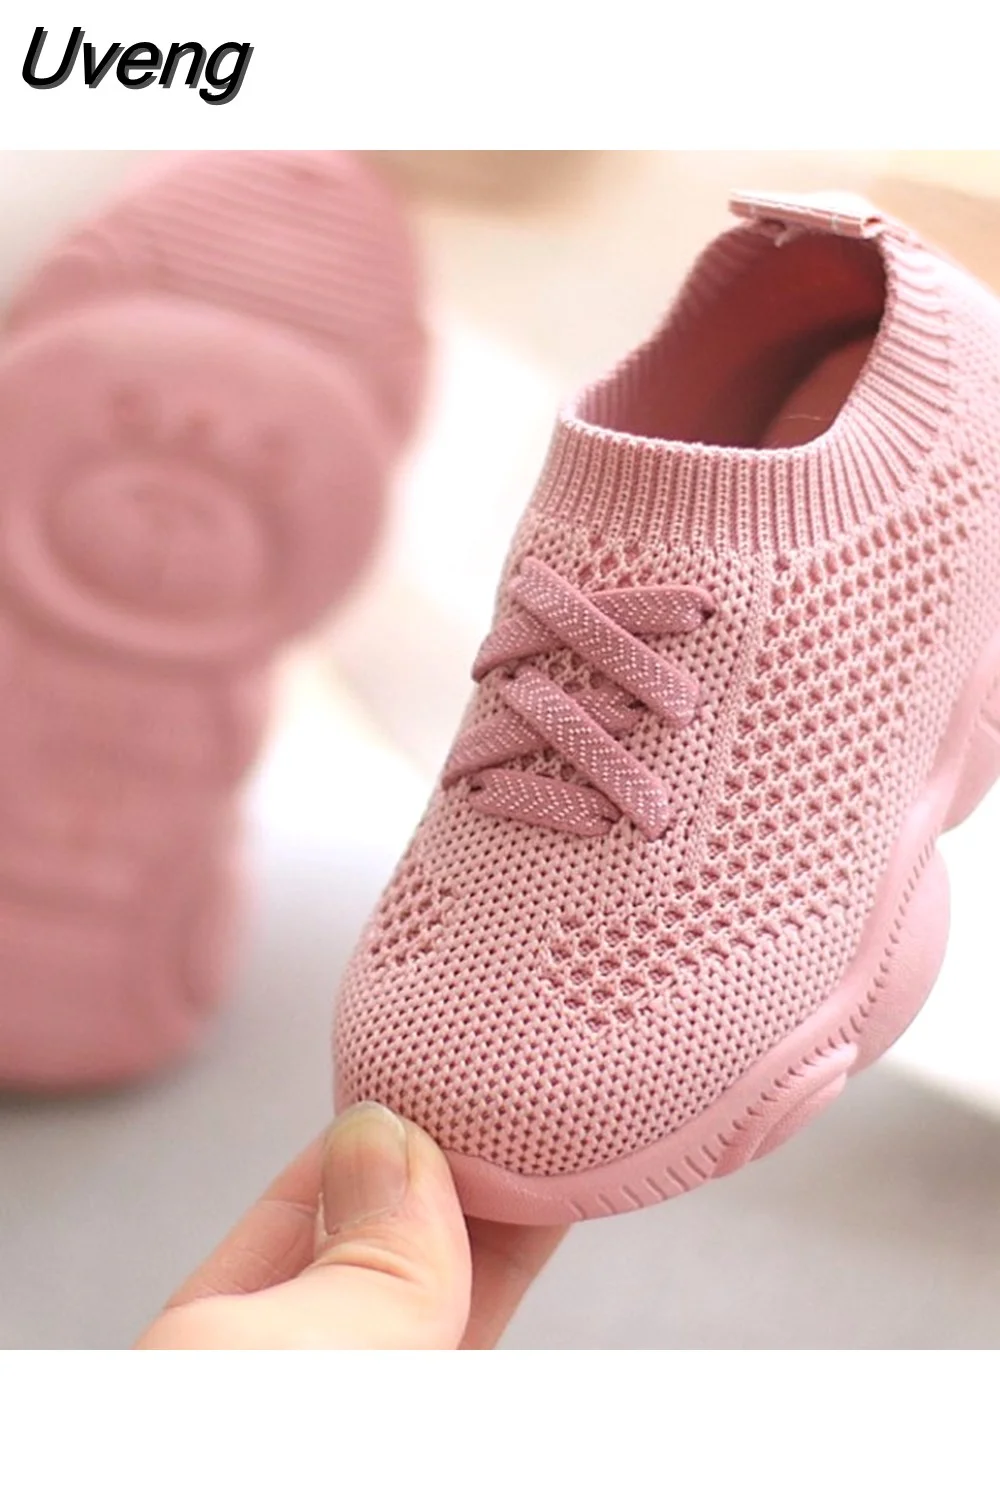 Uveng Shoes Antislip Soft Bottom Baby Sneaker Casual Flat Sneakers Shoes Children size Girls Boys Sports Shoes 420-0